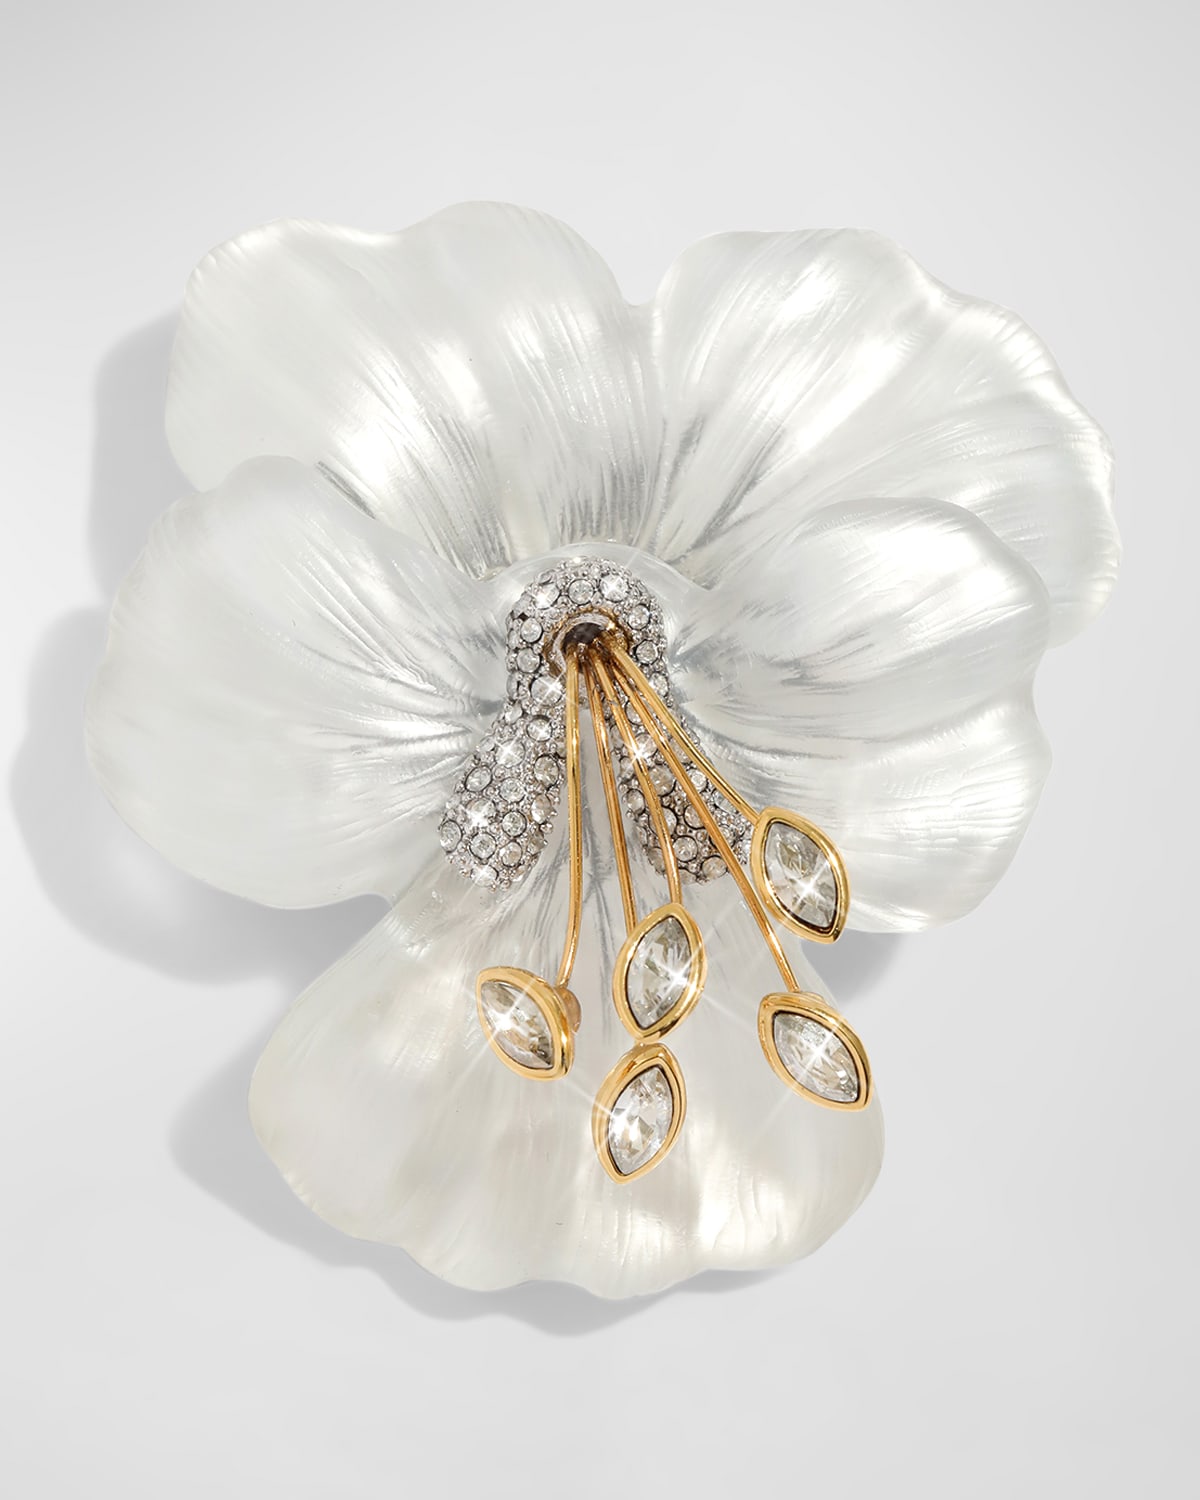 Alexis Bittar Pansy Lucite Crystal Pin In Nite Pansy